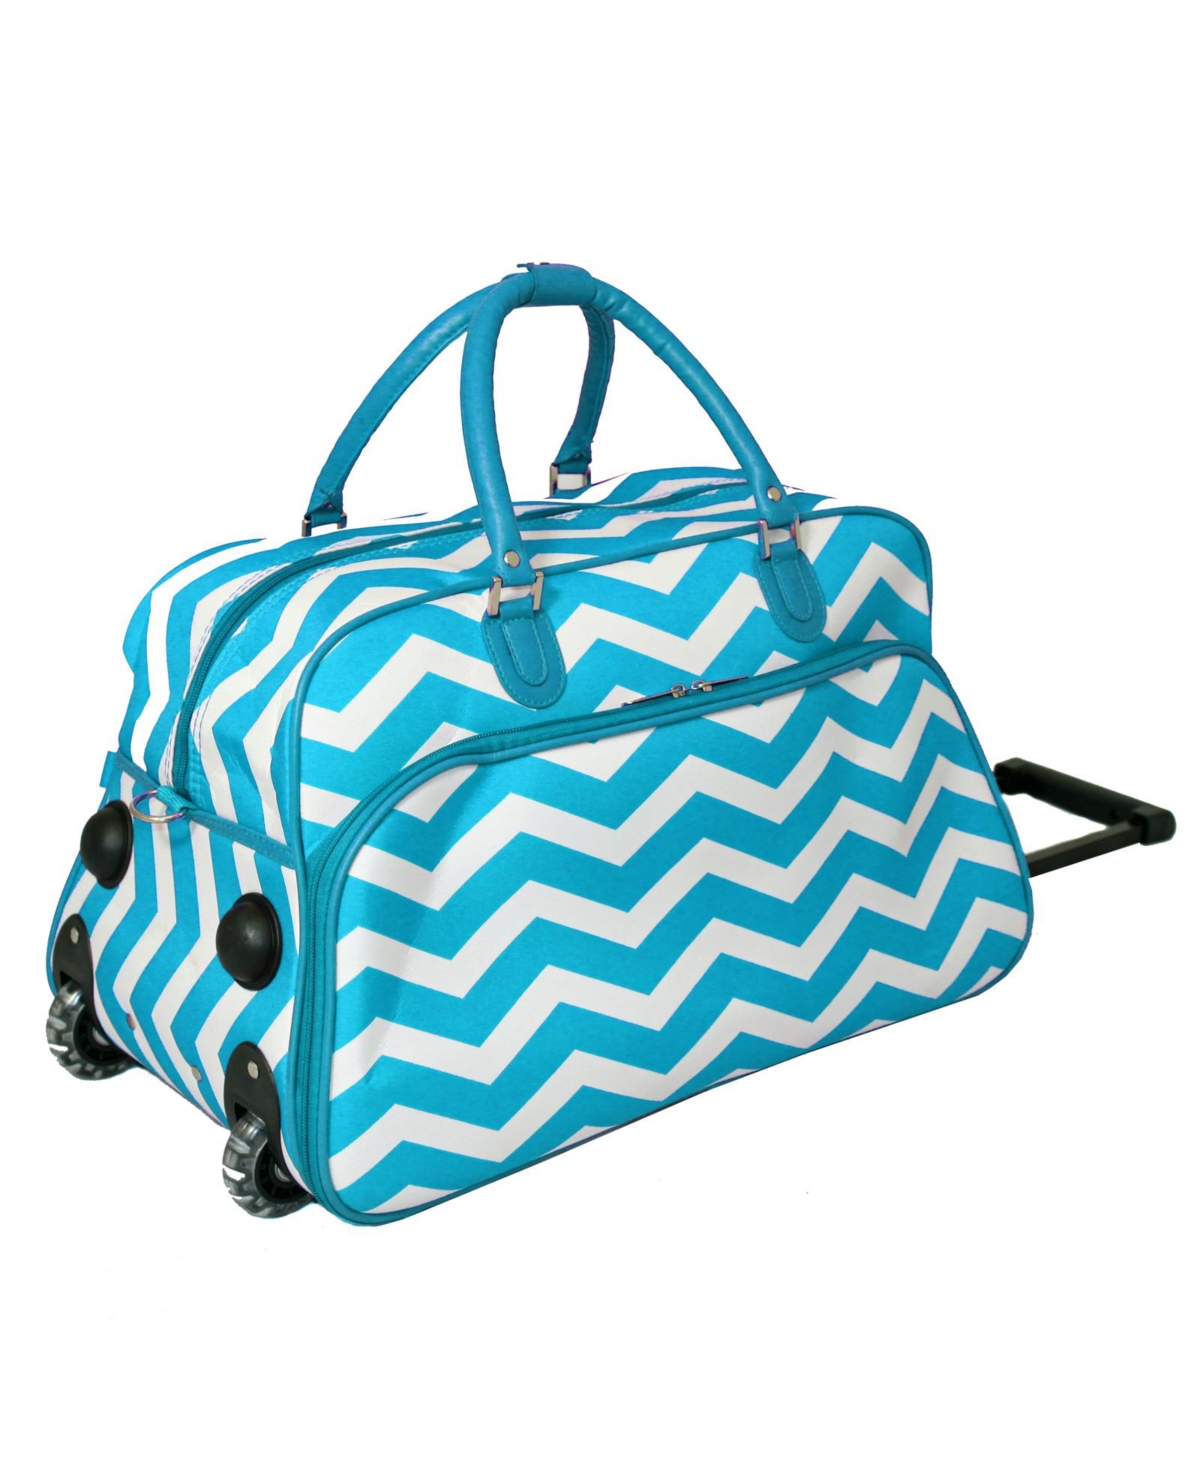 21-Inch Carry-On Rolling Duffel Bag - Teal-white